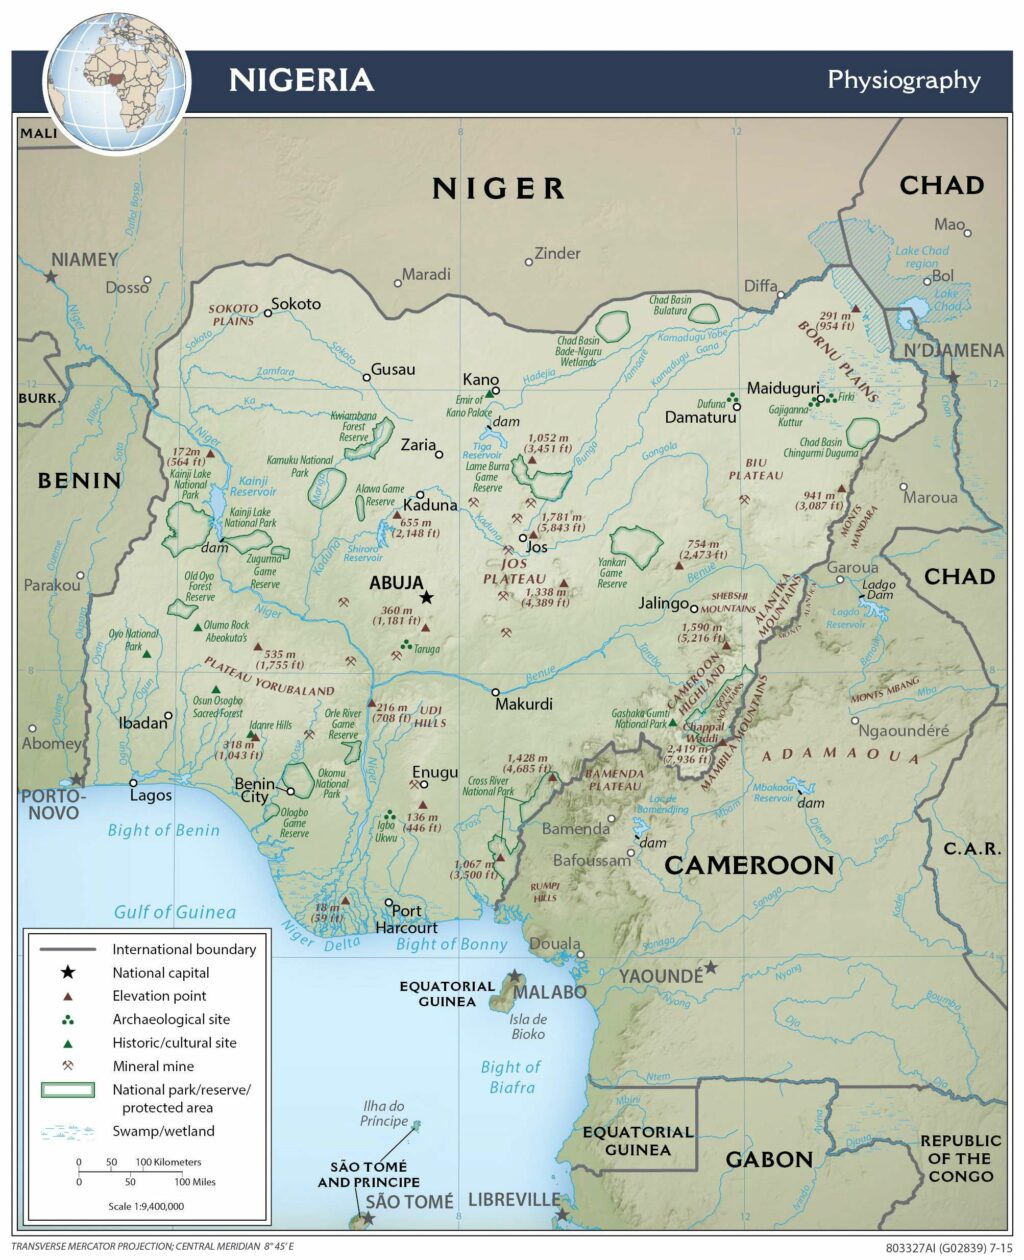 Nigeria physiography map.